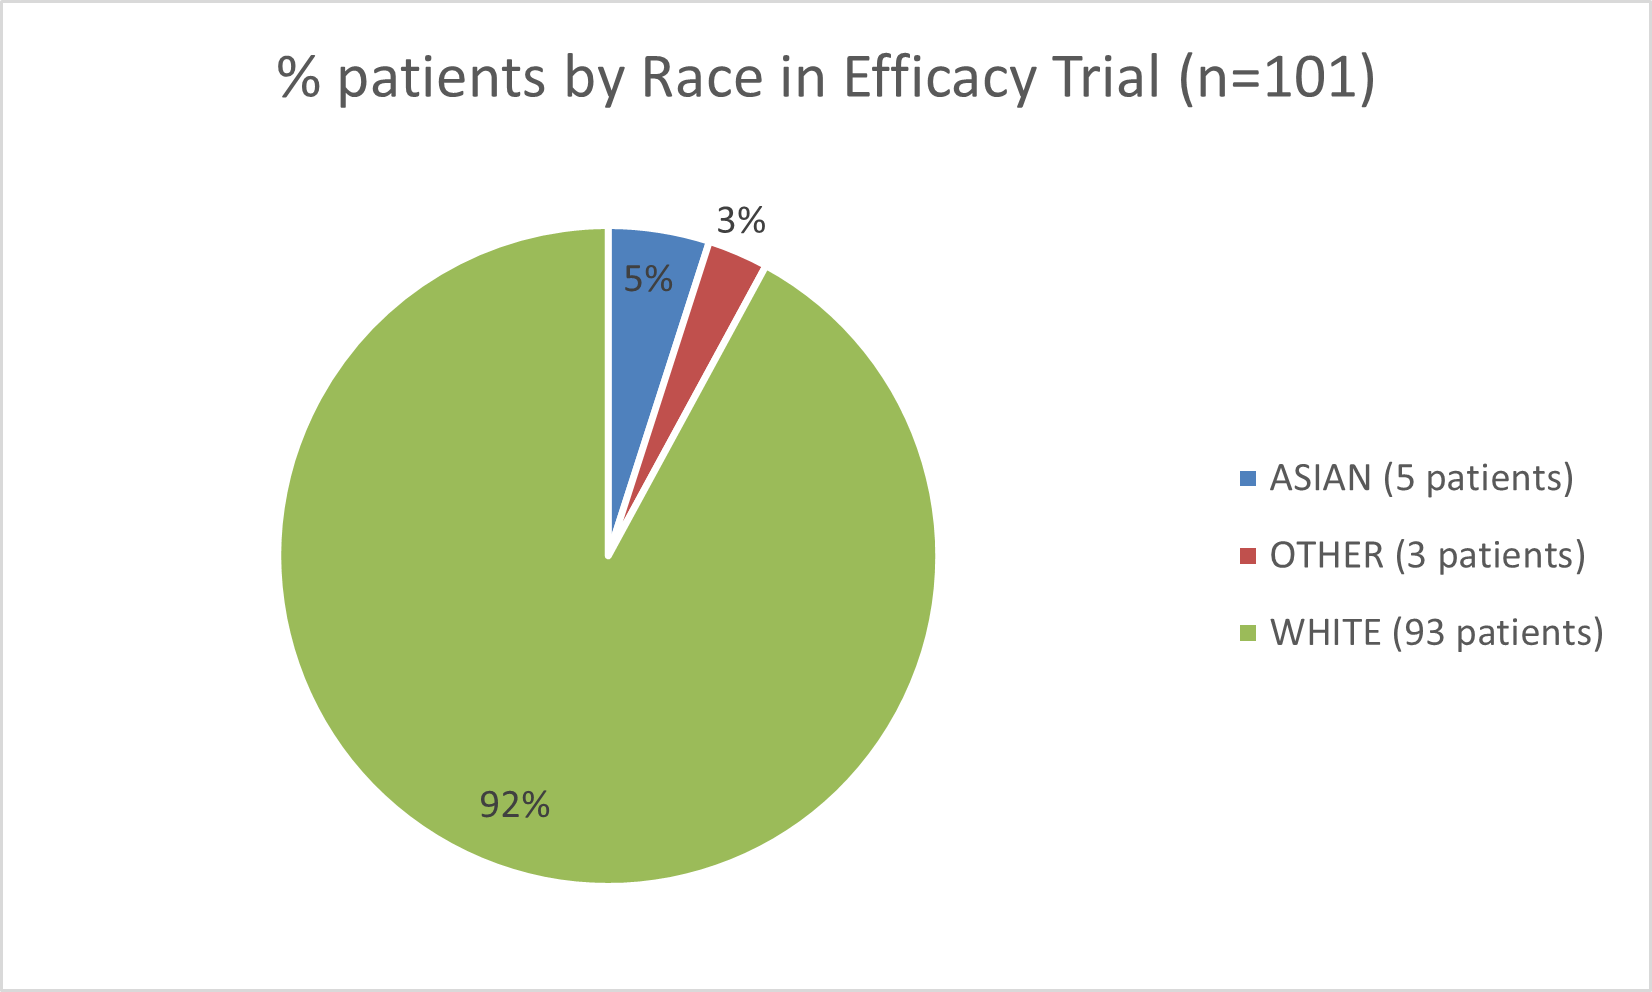 Pie chart summarizing how many White, Asian, and Other patients were in the clinical trial to evaluate the efficacy.  In total, 93 (92%) white patients, 5(5%) Asian patients, and 3 (3%) Other patients participated in the clinical trial.